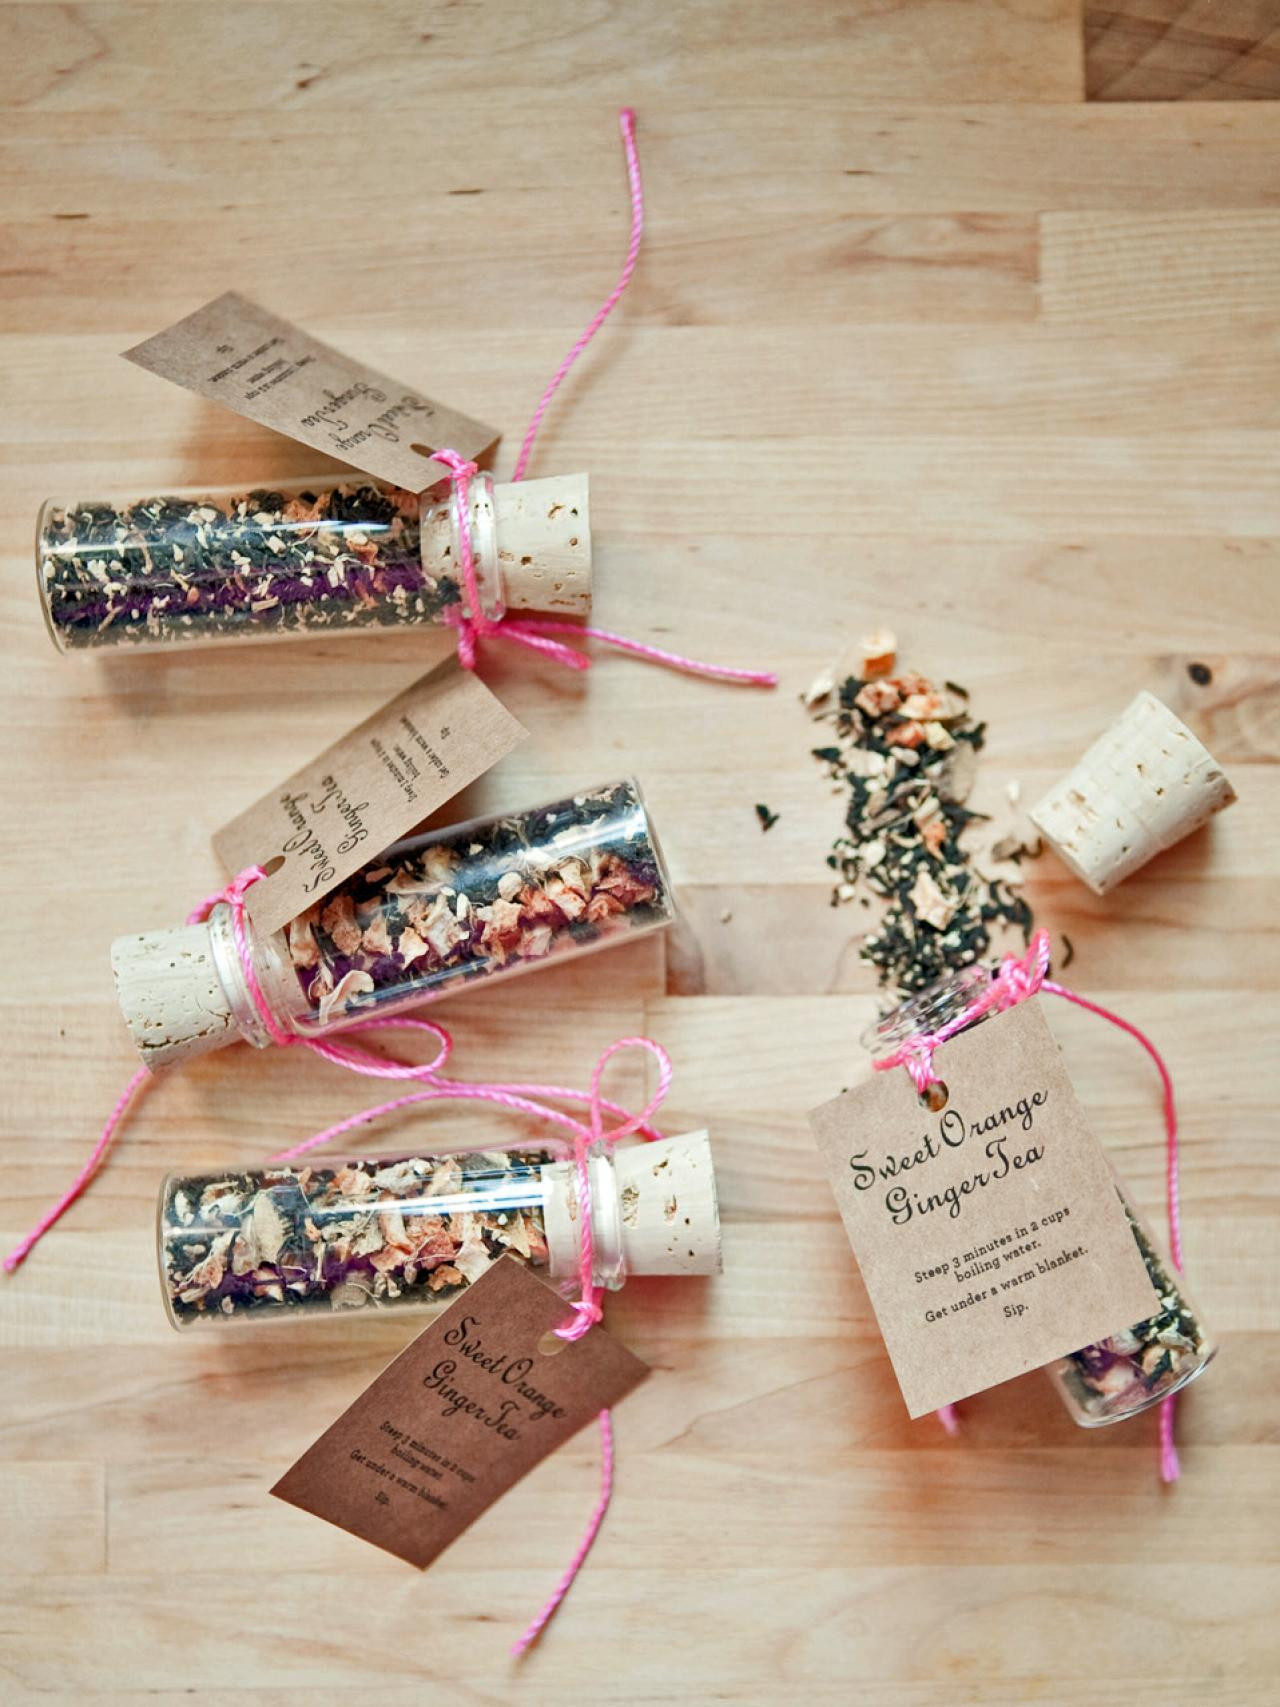 Homemade Christmas Party Favors Ideas
 30 Festive DIY Holiday Party Favors